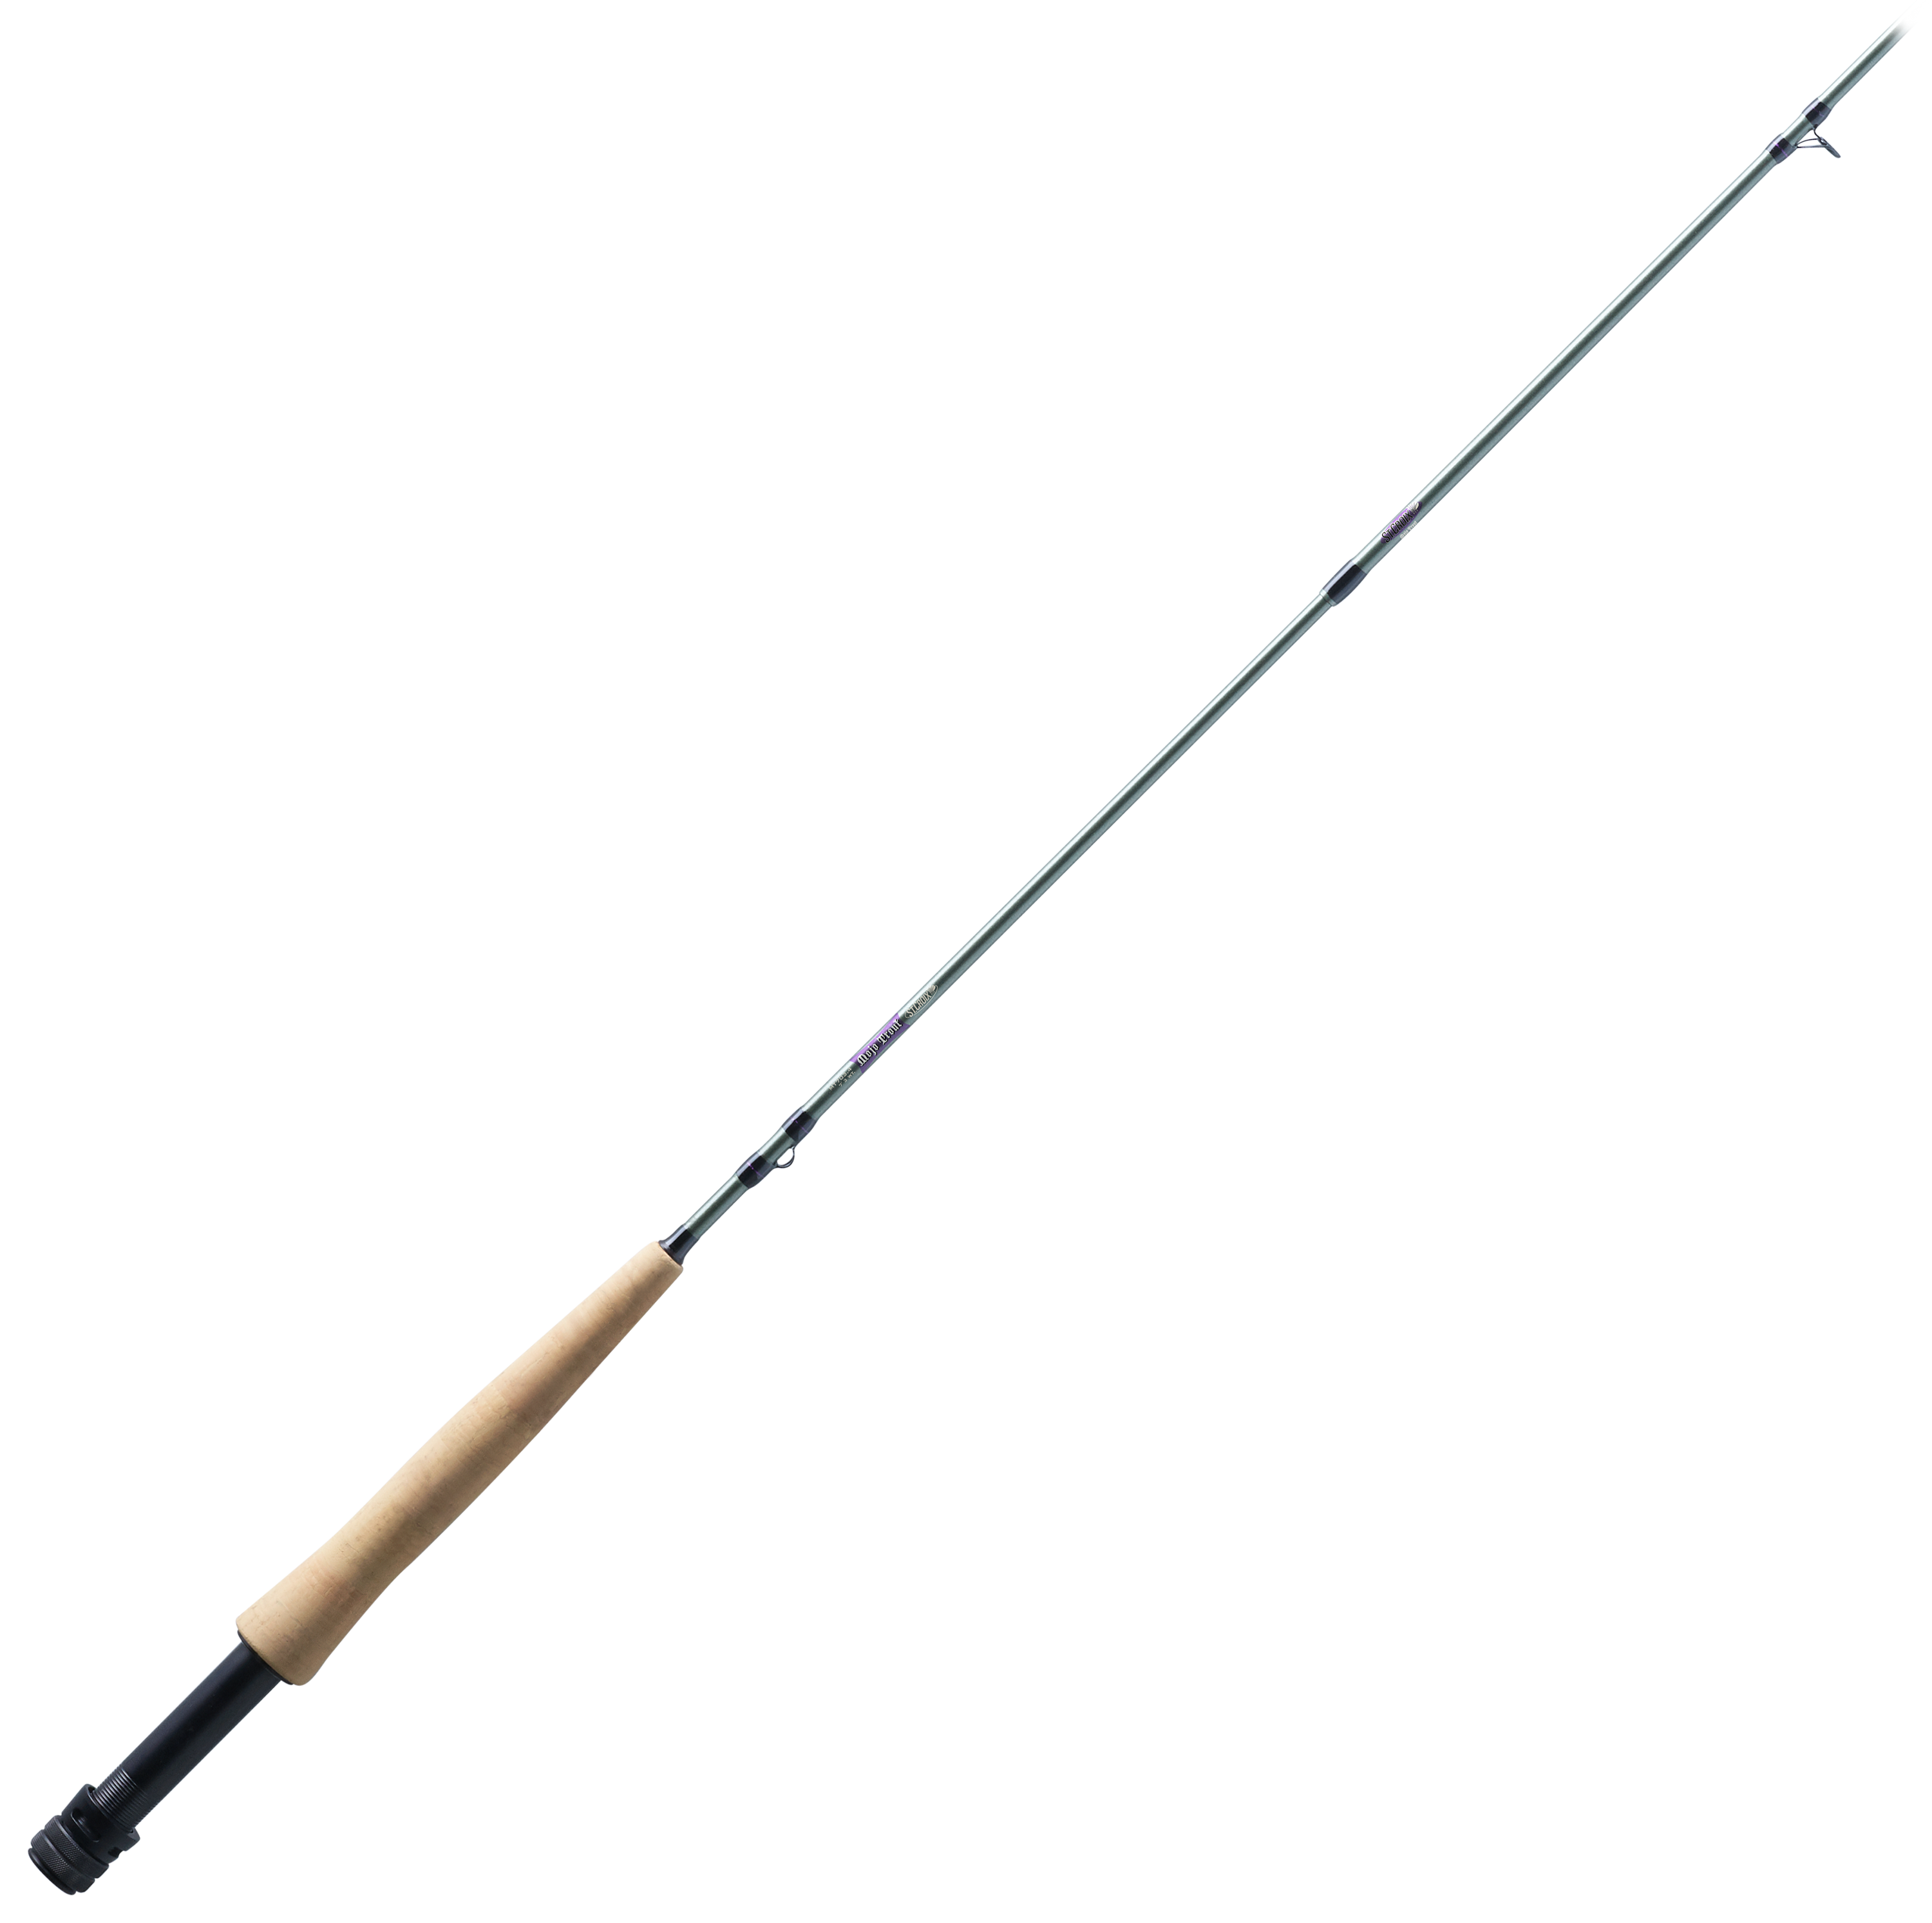 St. Croix Mojo Trout Fly Rod - MT865.4